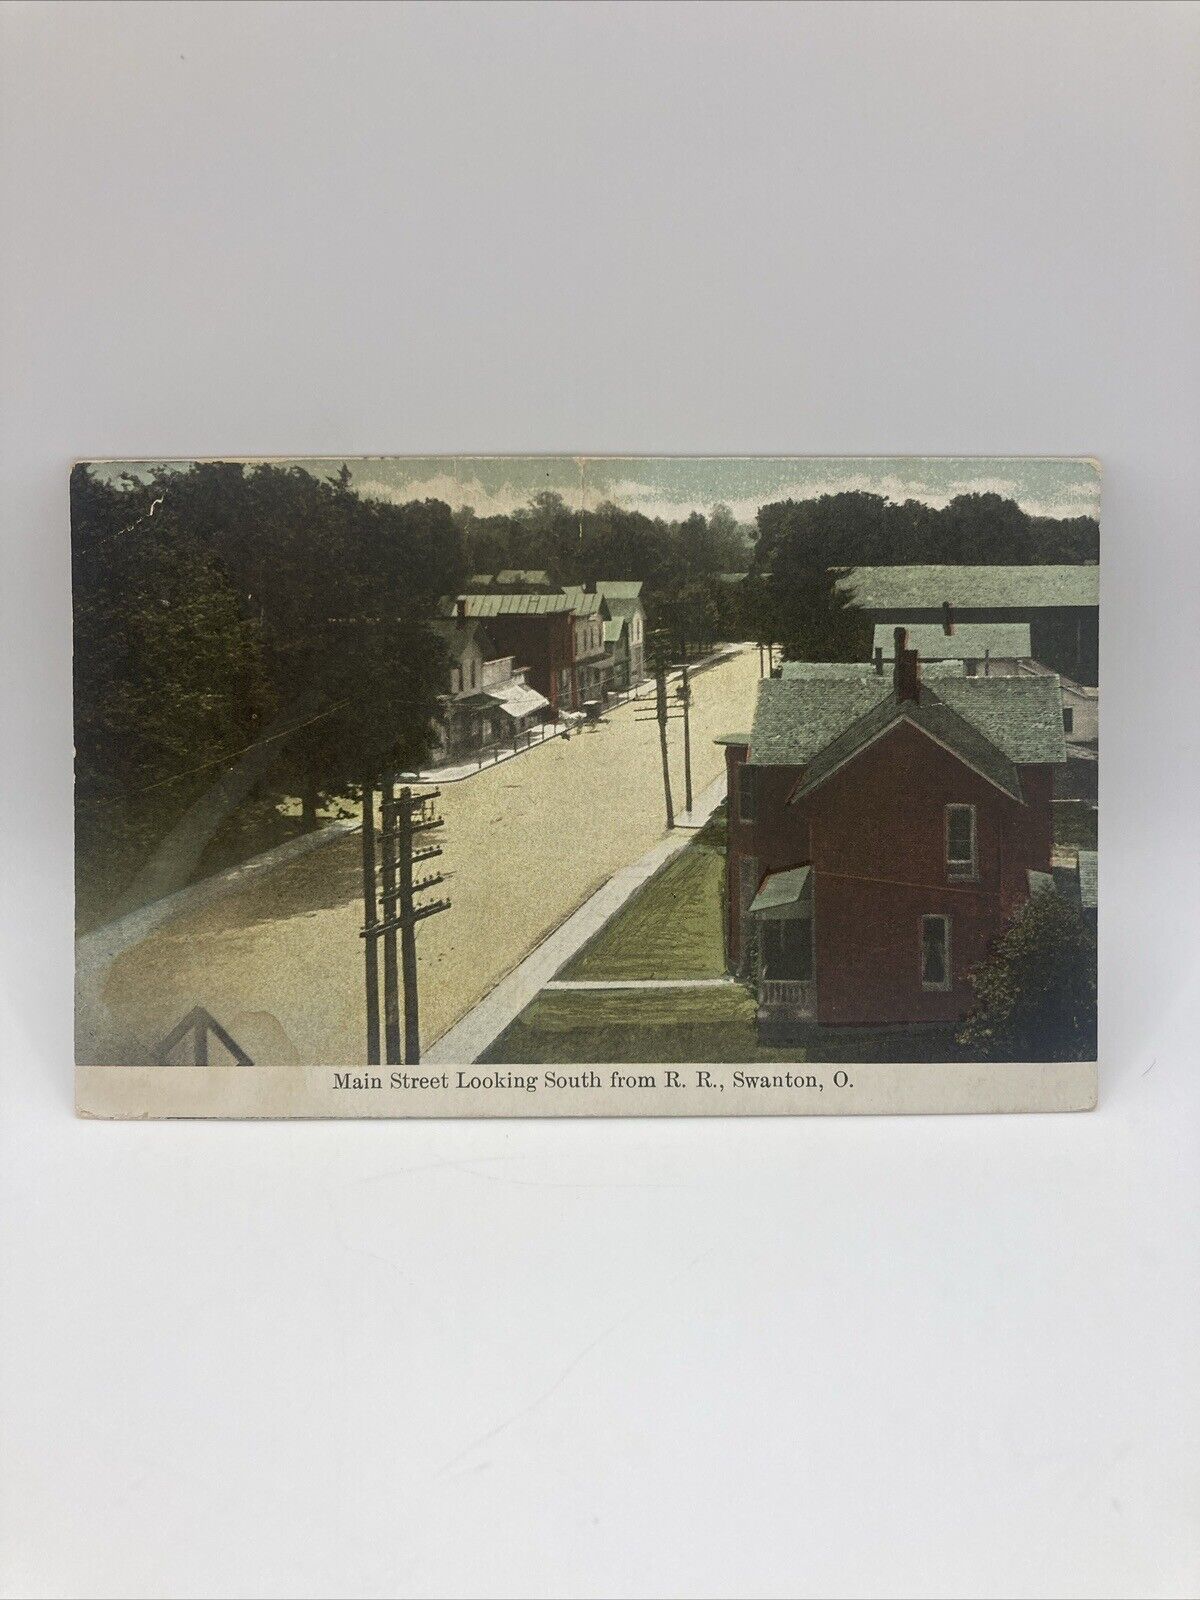 Vintage Postcard Main Street Looking South From R.R. Swanton Ohio